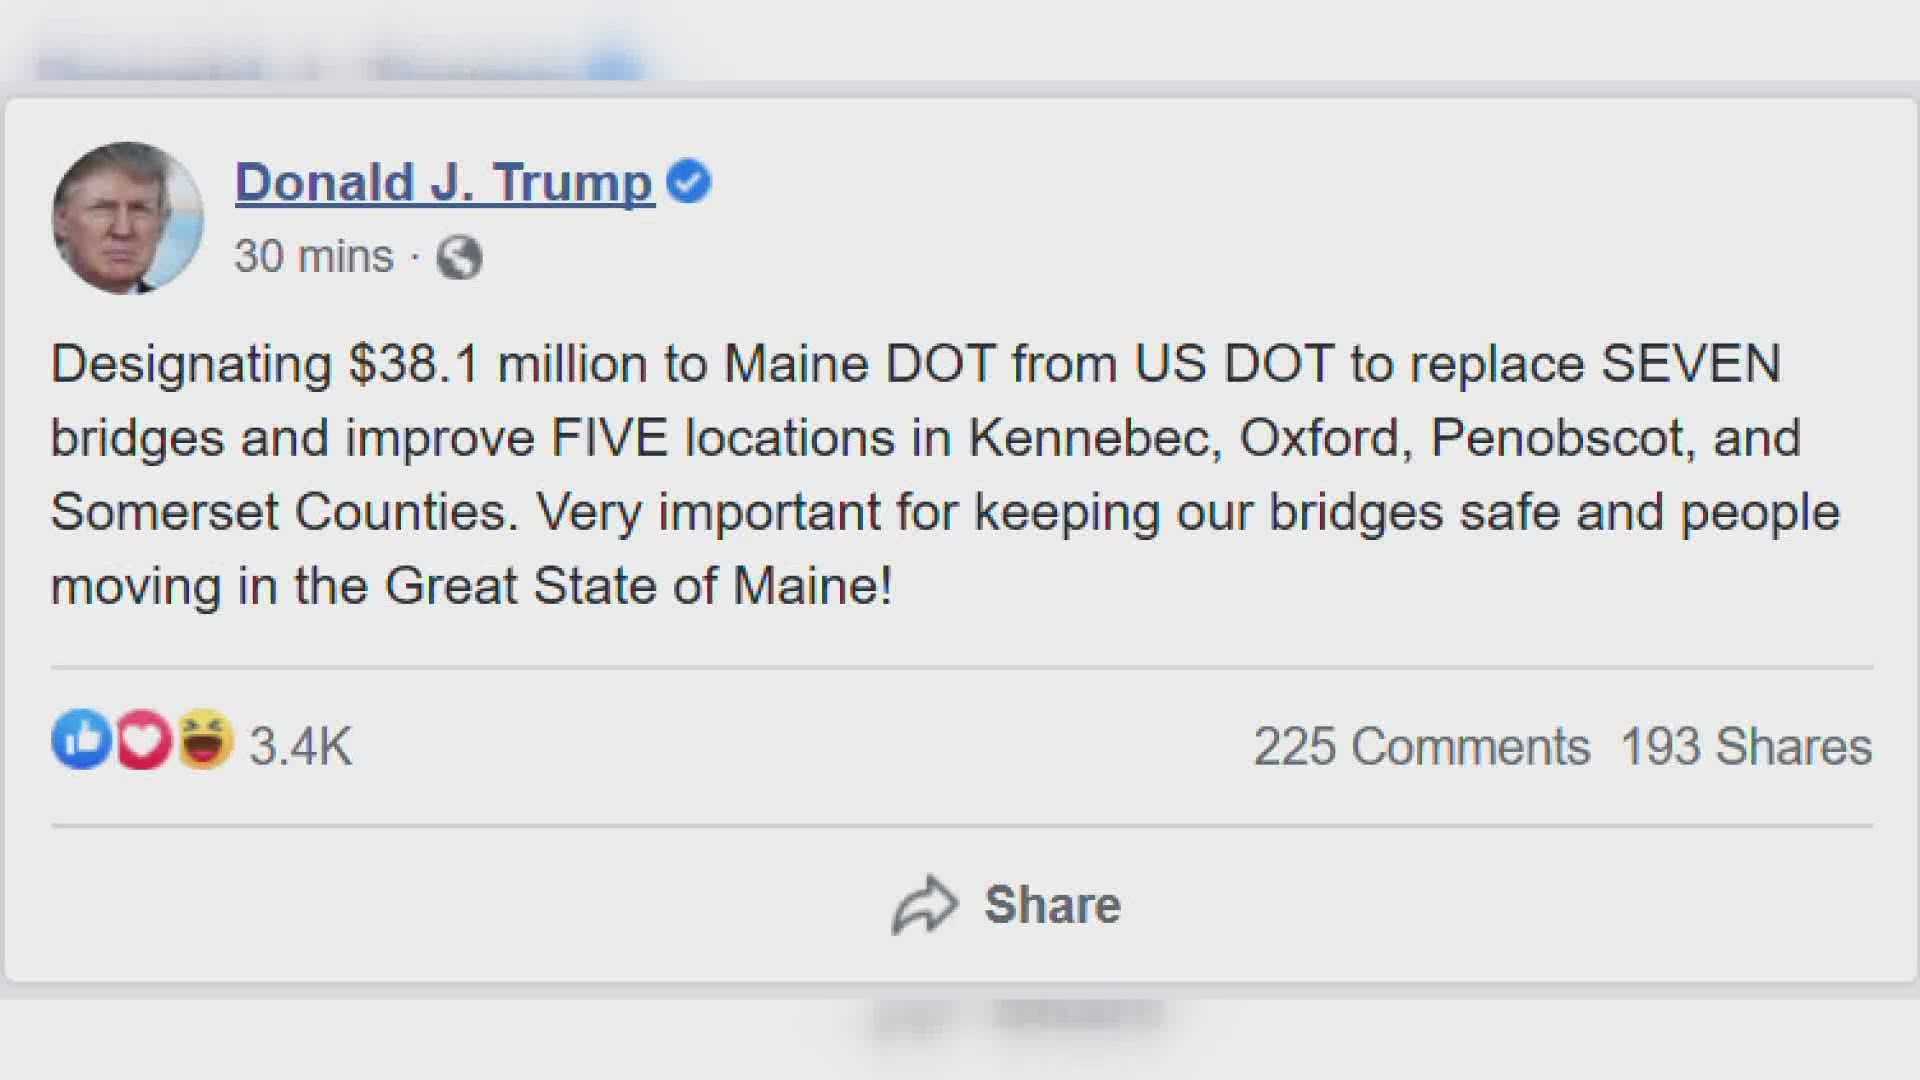 "Very important for keeping our bridges safe and people moving in the Great State of Maine," Trump wrote in his tweet.